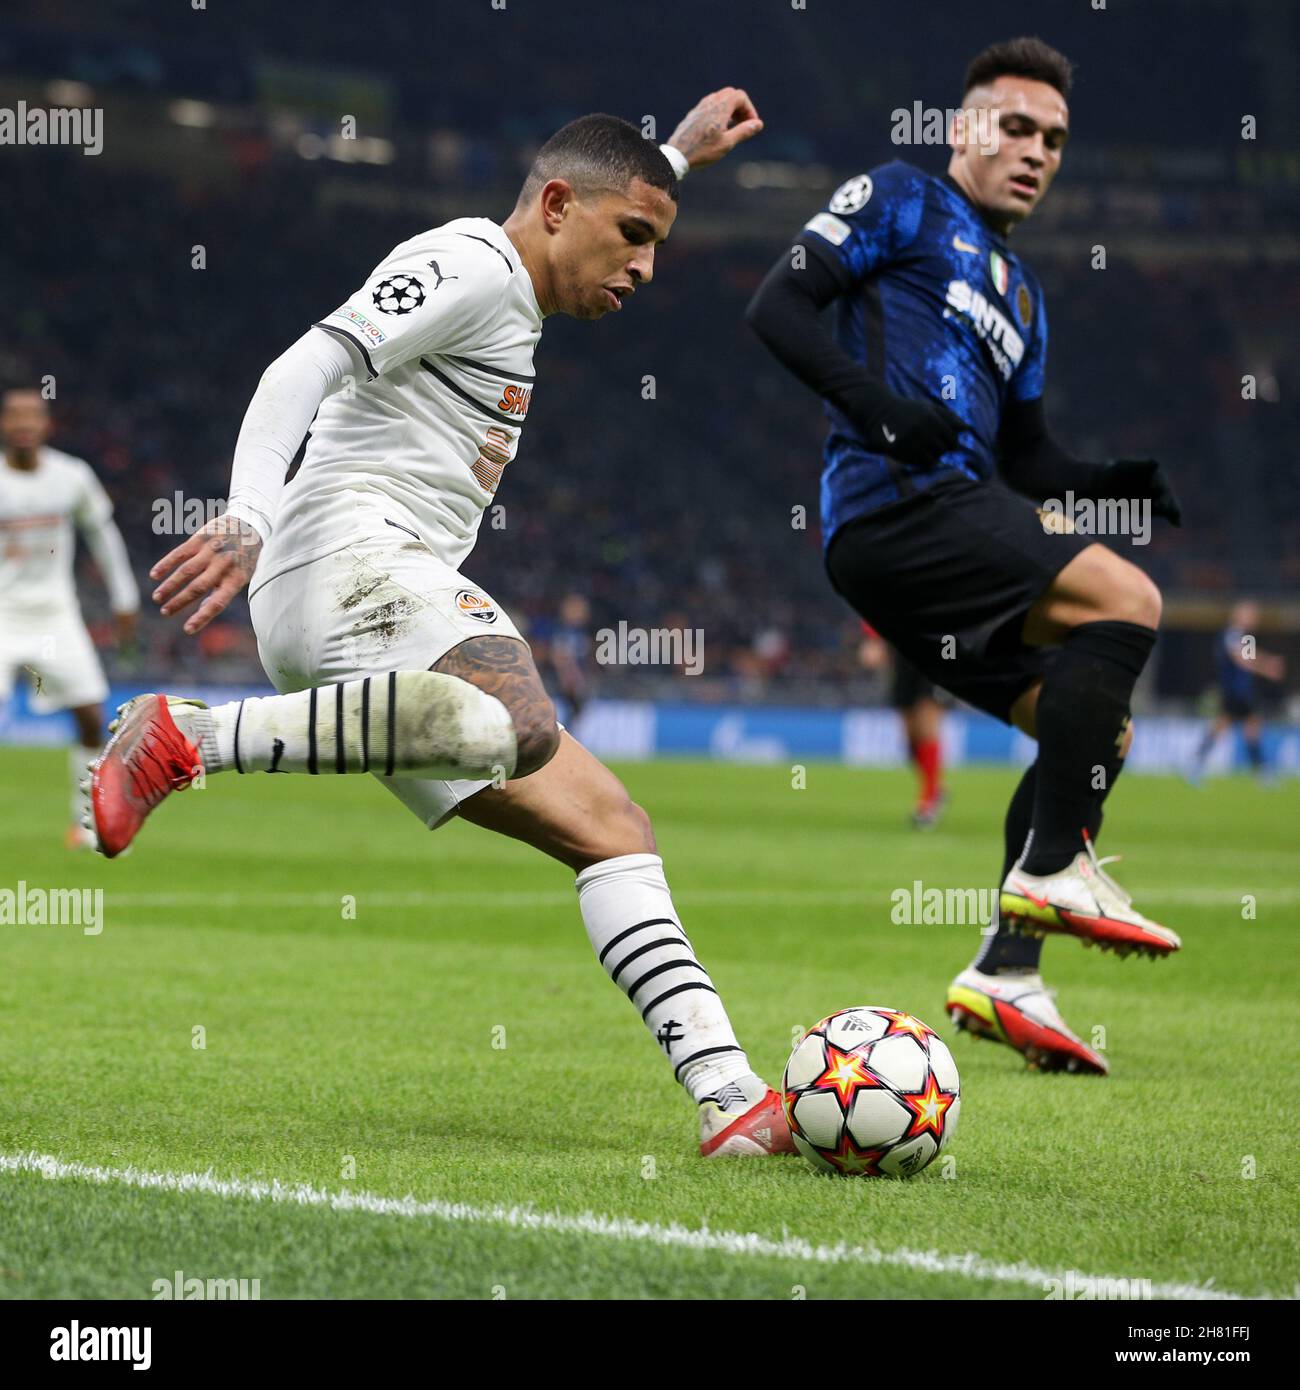 Milan, Italy. 24th Nov, 2021. Dodo (FC Shakhtar Donetsk) and Lautaro Martinez (FC Internazionale) during Inter - FC Internazionale vs Shakhtar Donetsk, UEFA Champions League football match in Milan, Italy, November 24 2021 Credit: Independent Photo Agency/Alamy Live News Stock Photo